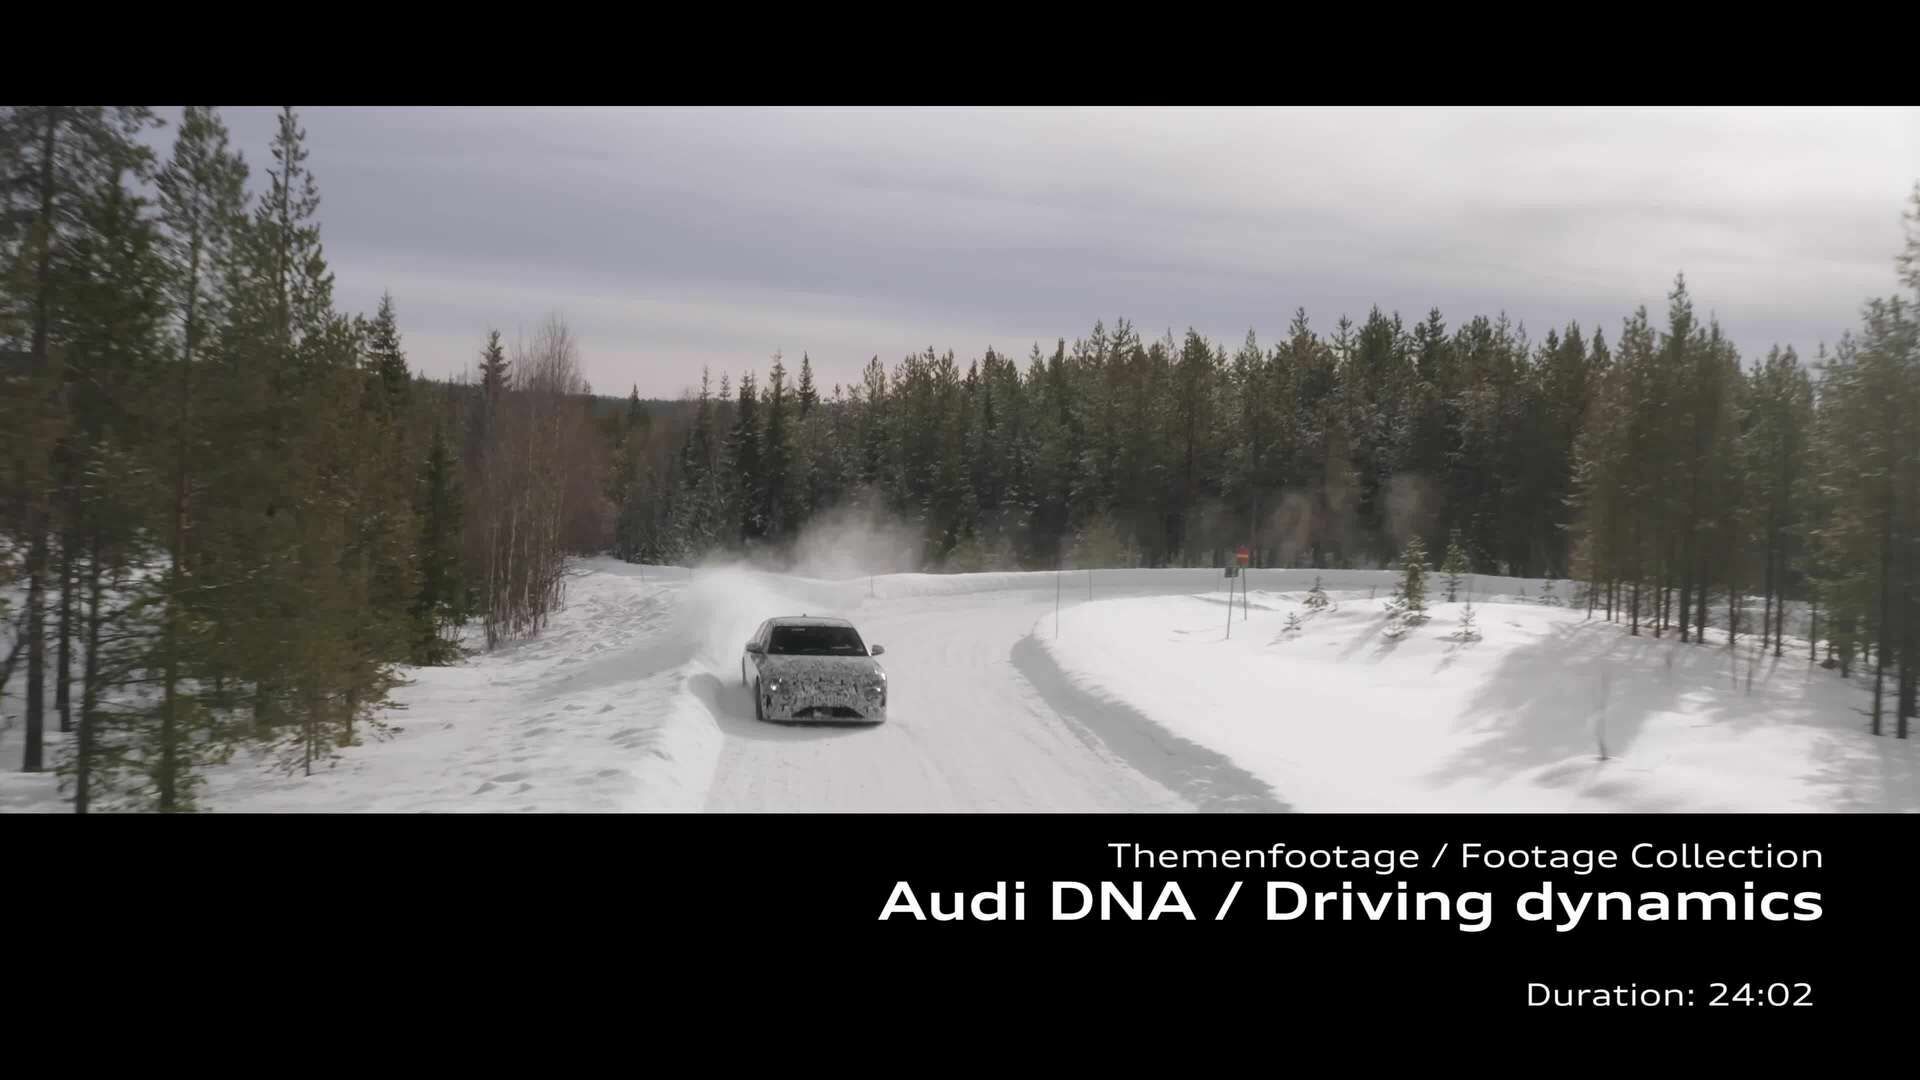 Footage Collection: Audi DNA / Driving dynamics